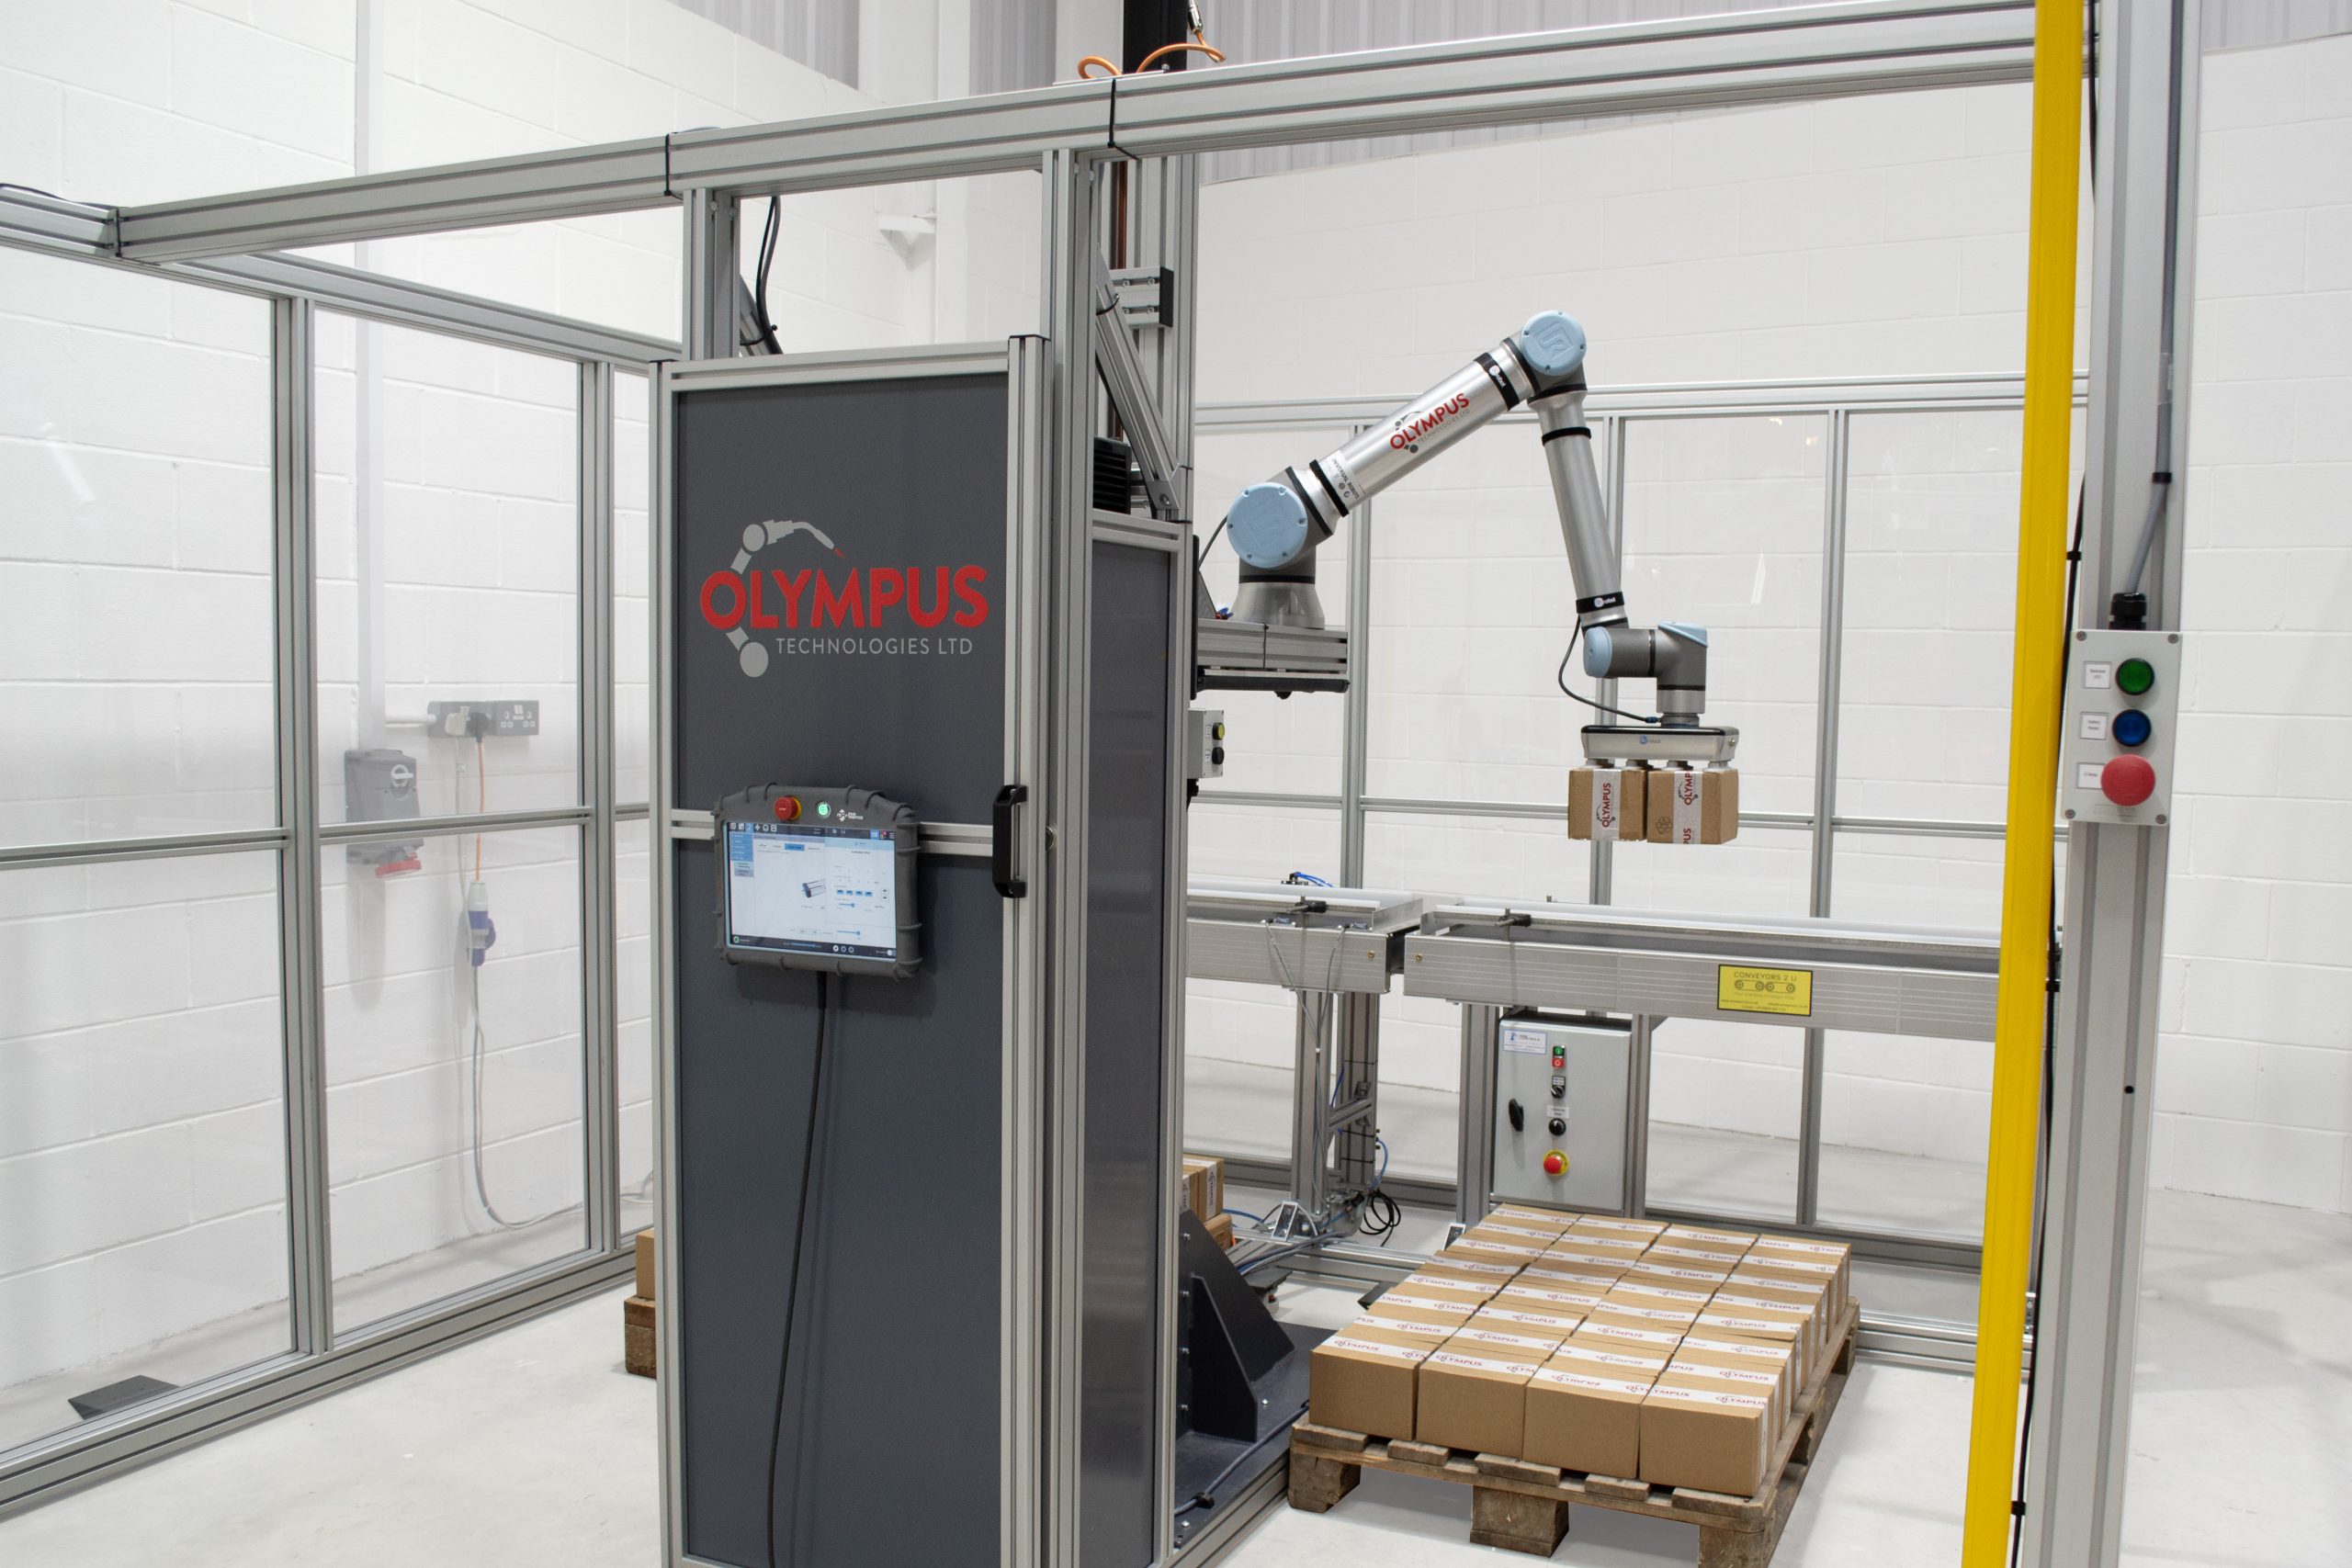 The Olympus UR20 Palletising System offers the smallest footprint cell whilst enabling the robot to safely palletise at its maximum cycles per minute.